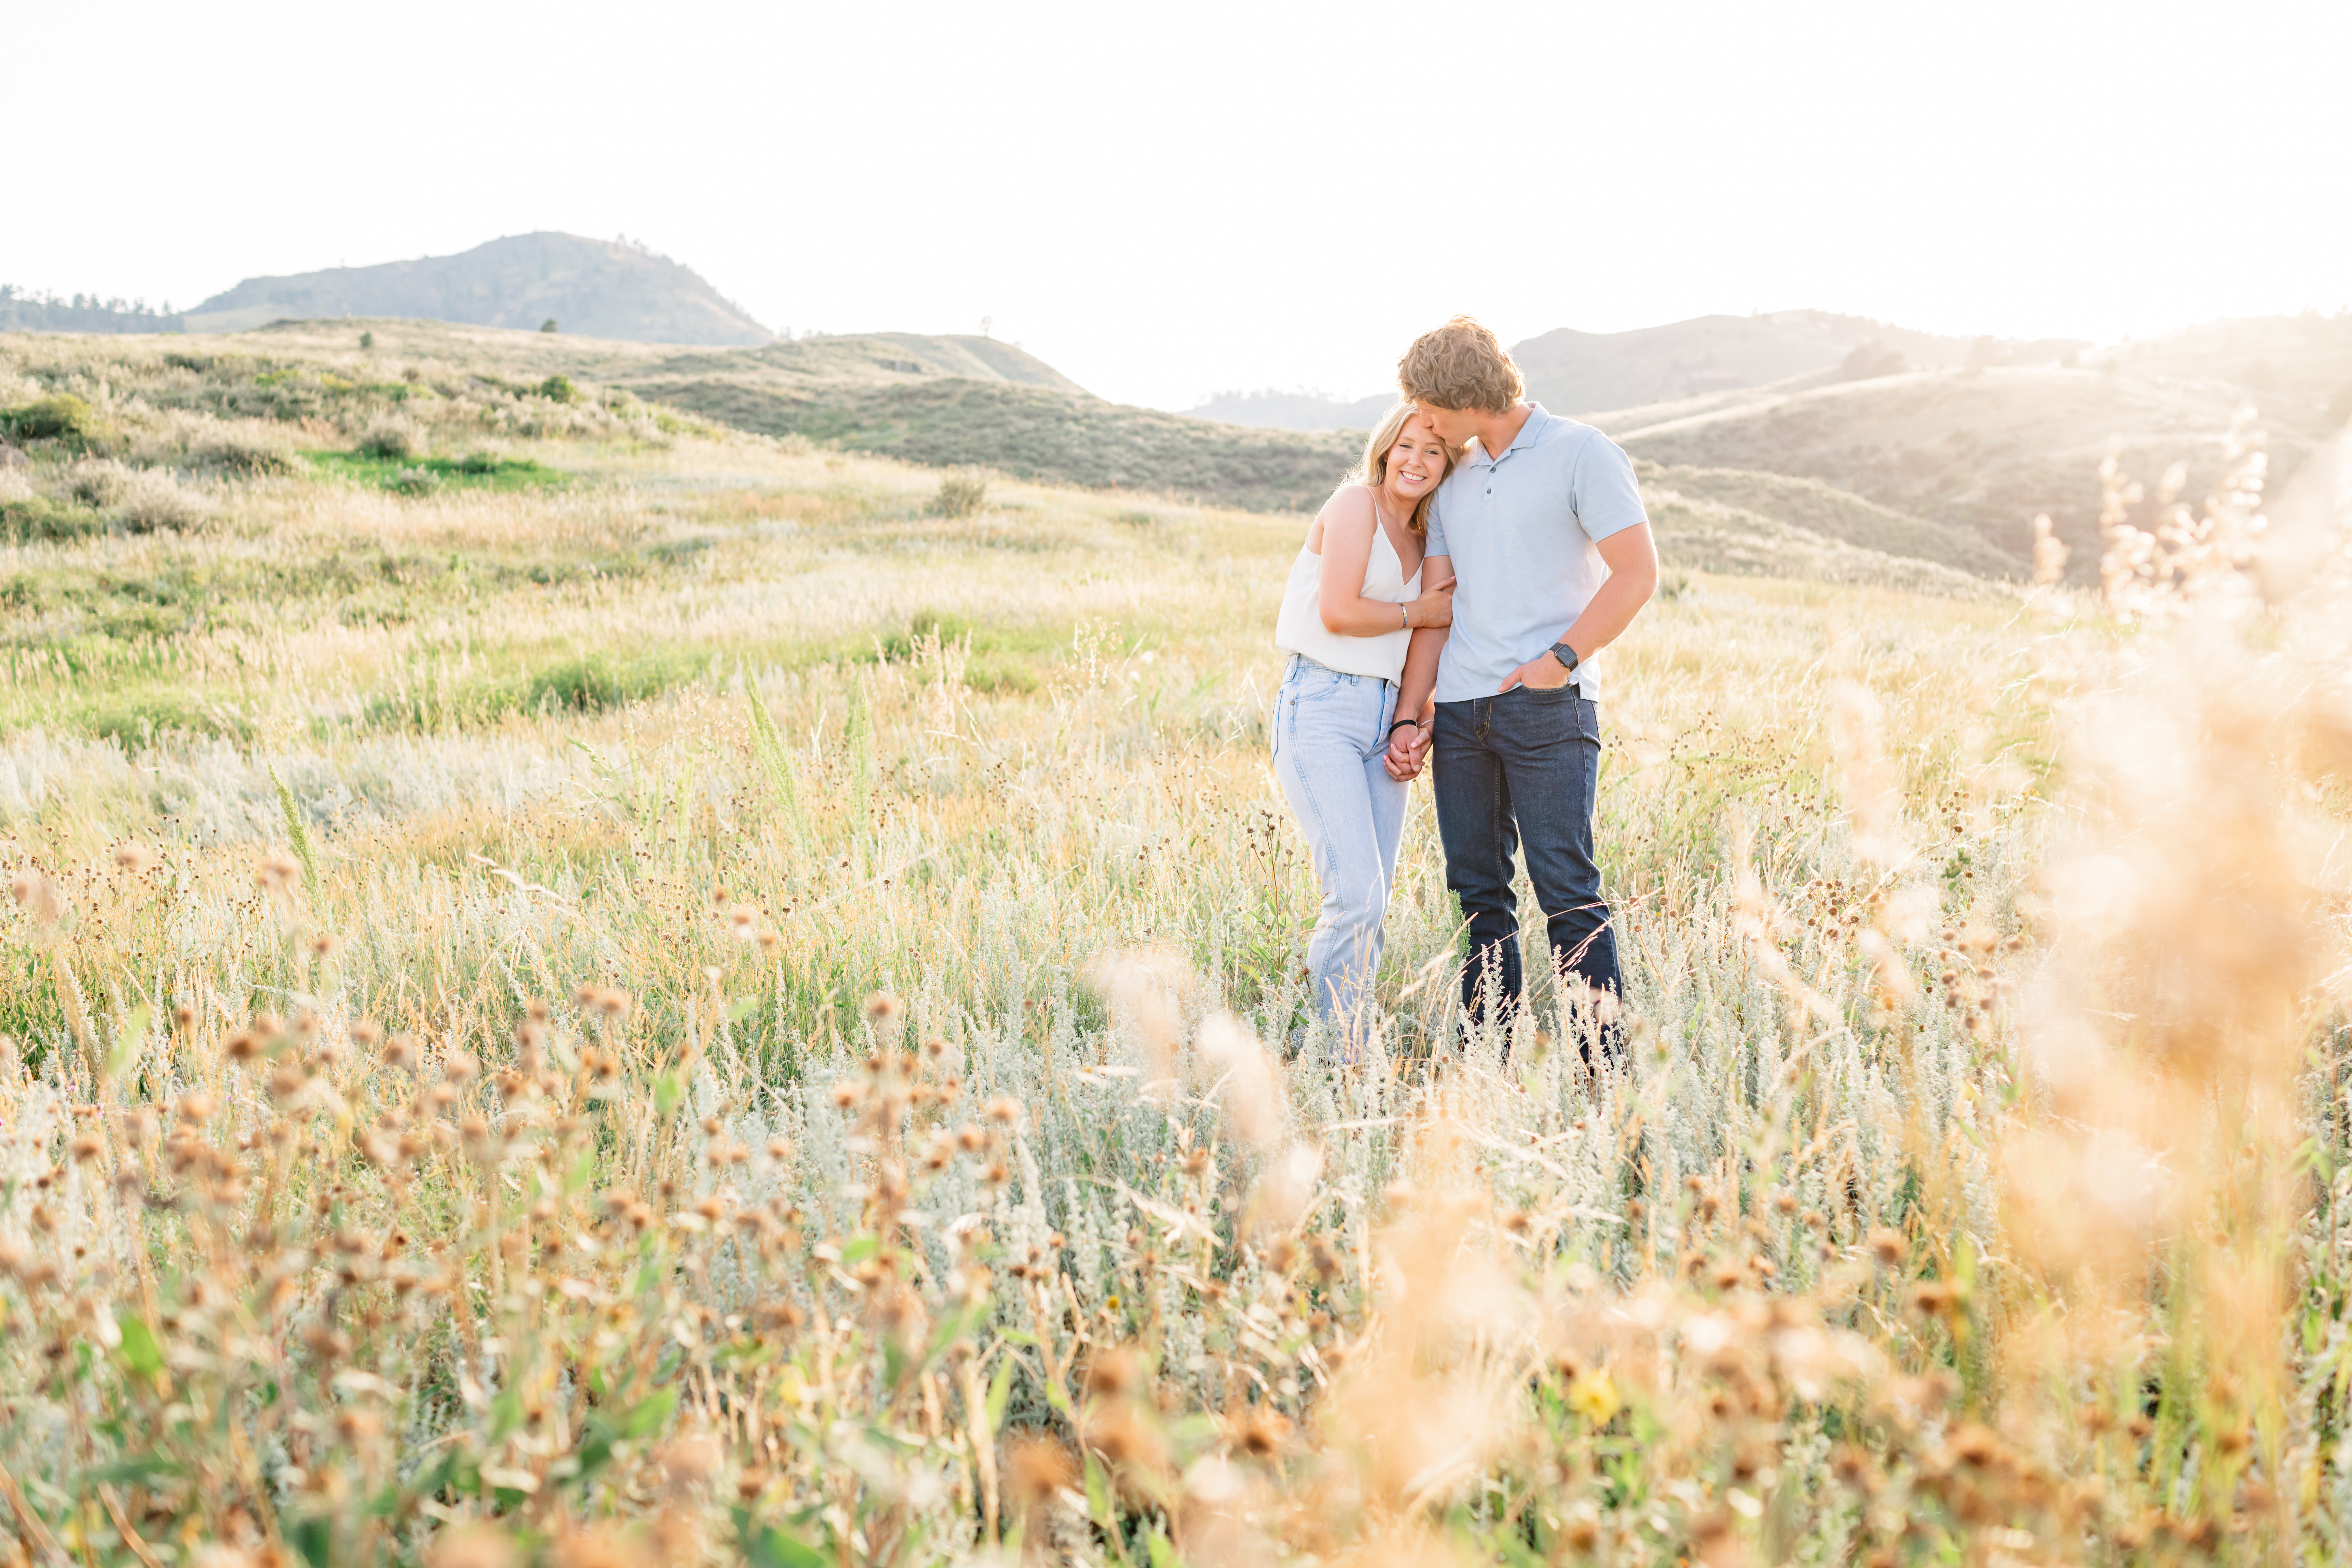 Romantic summer engagement in Fort Collins, Colorado, with the dreamiest rolling hills and sunkissed glow near Horsetooth reservoir and Lory State Park | Britni Girard Photography